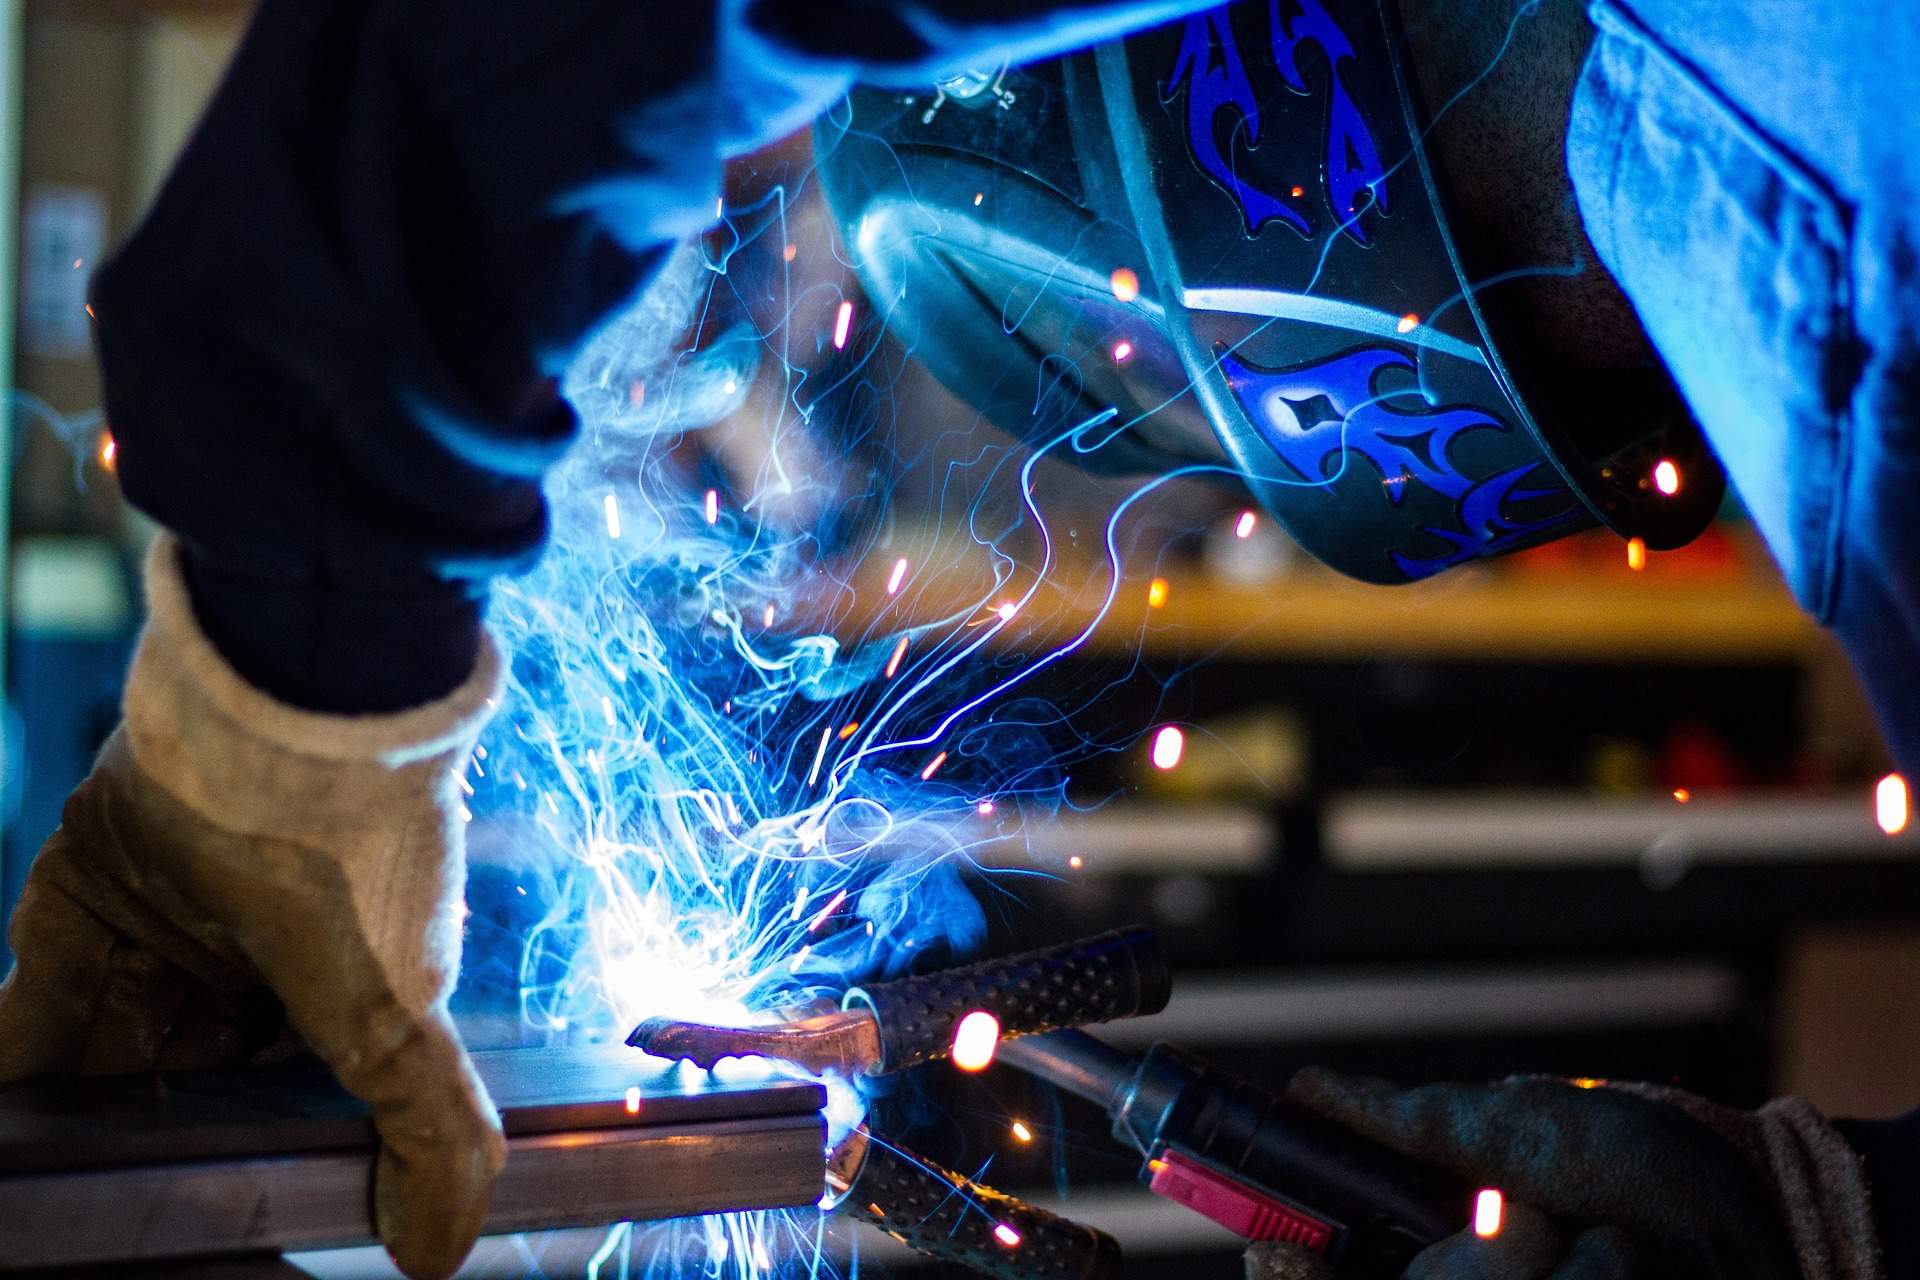 The best approaches to manufacturing business technology